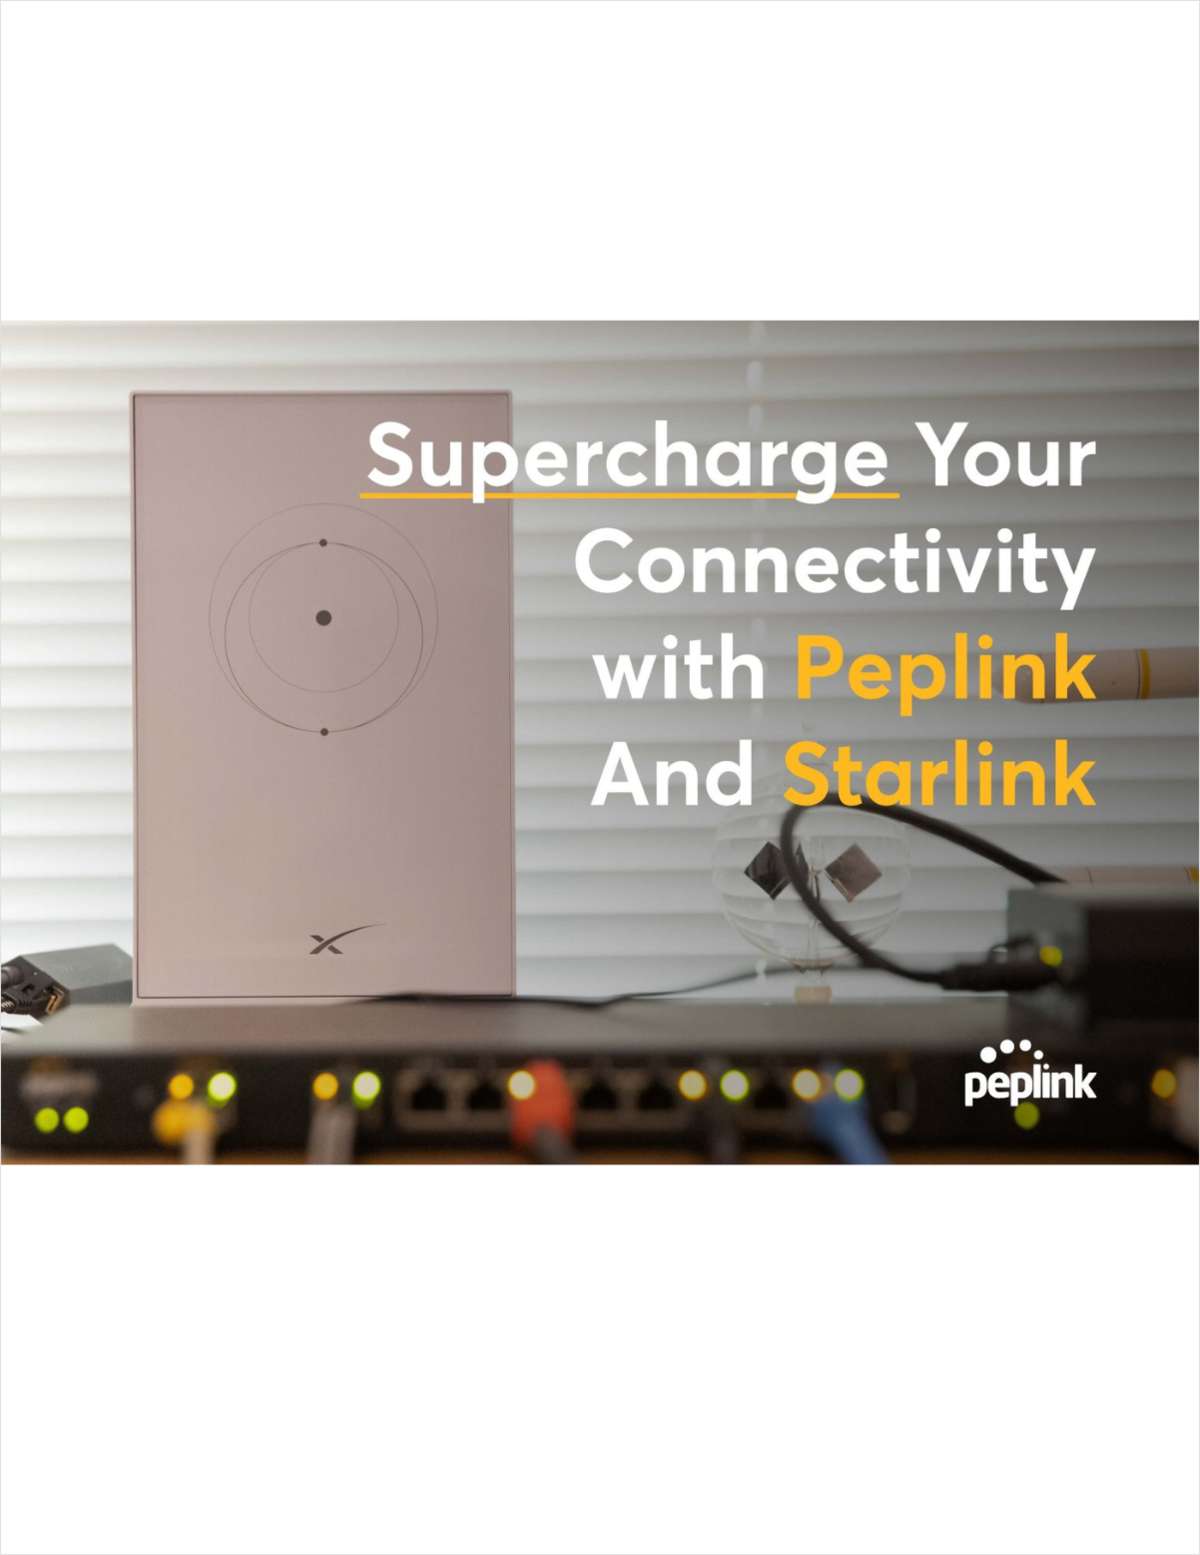 Supercharge Your Connectivity with Peplink and Starlink